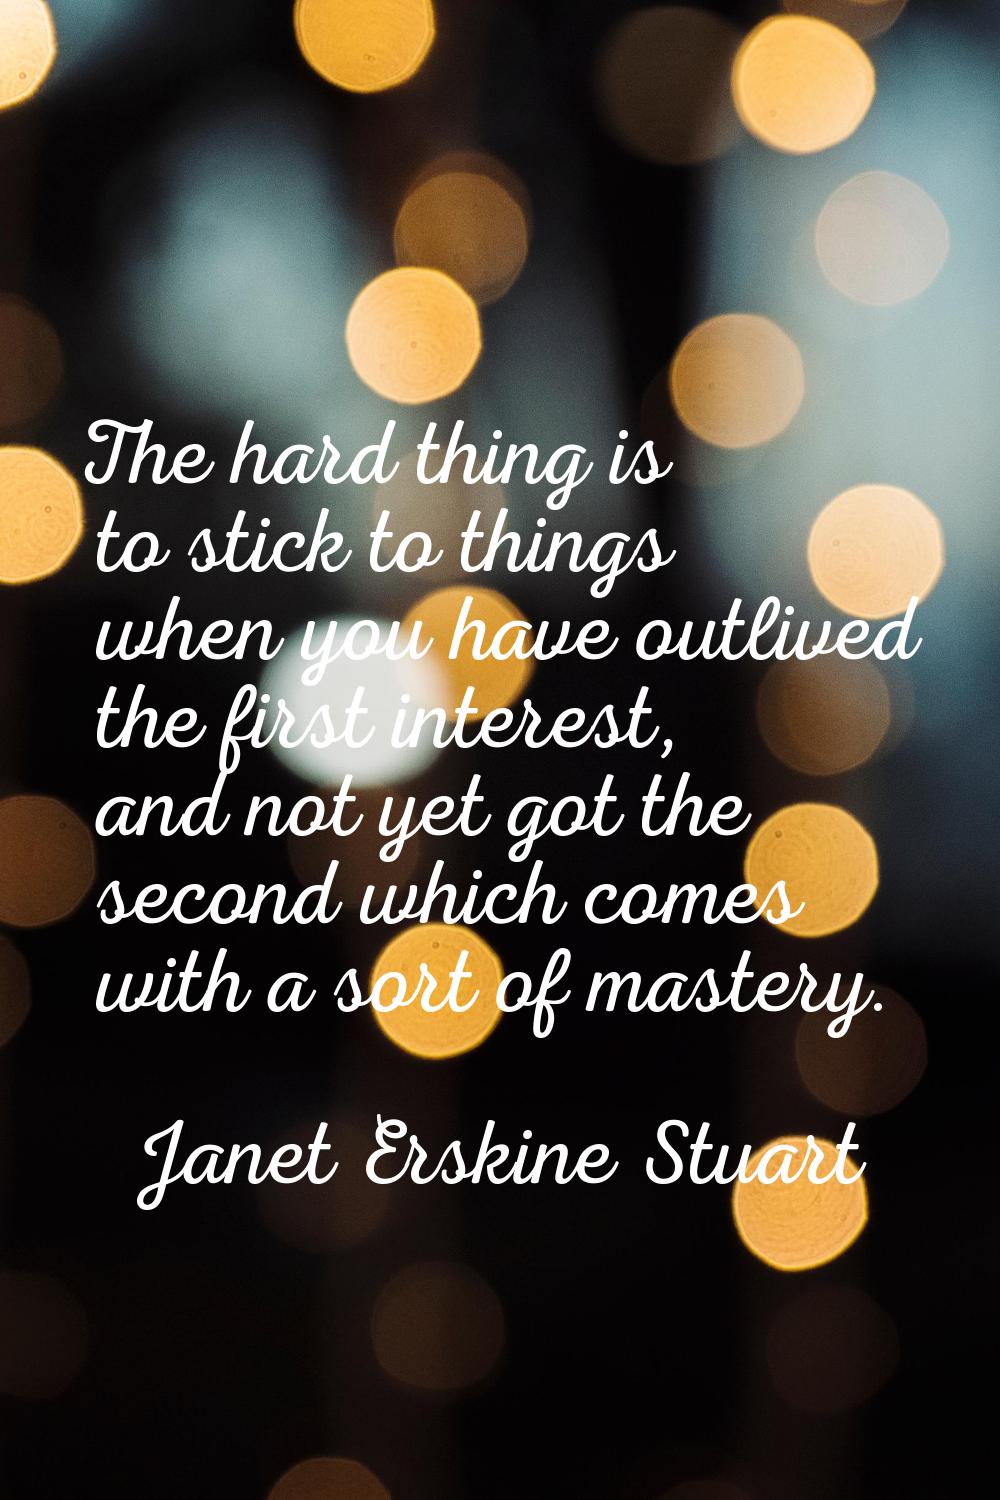 The hard thing is to stick to things when you have outlived the first interest, and not yet got the